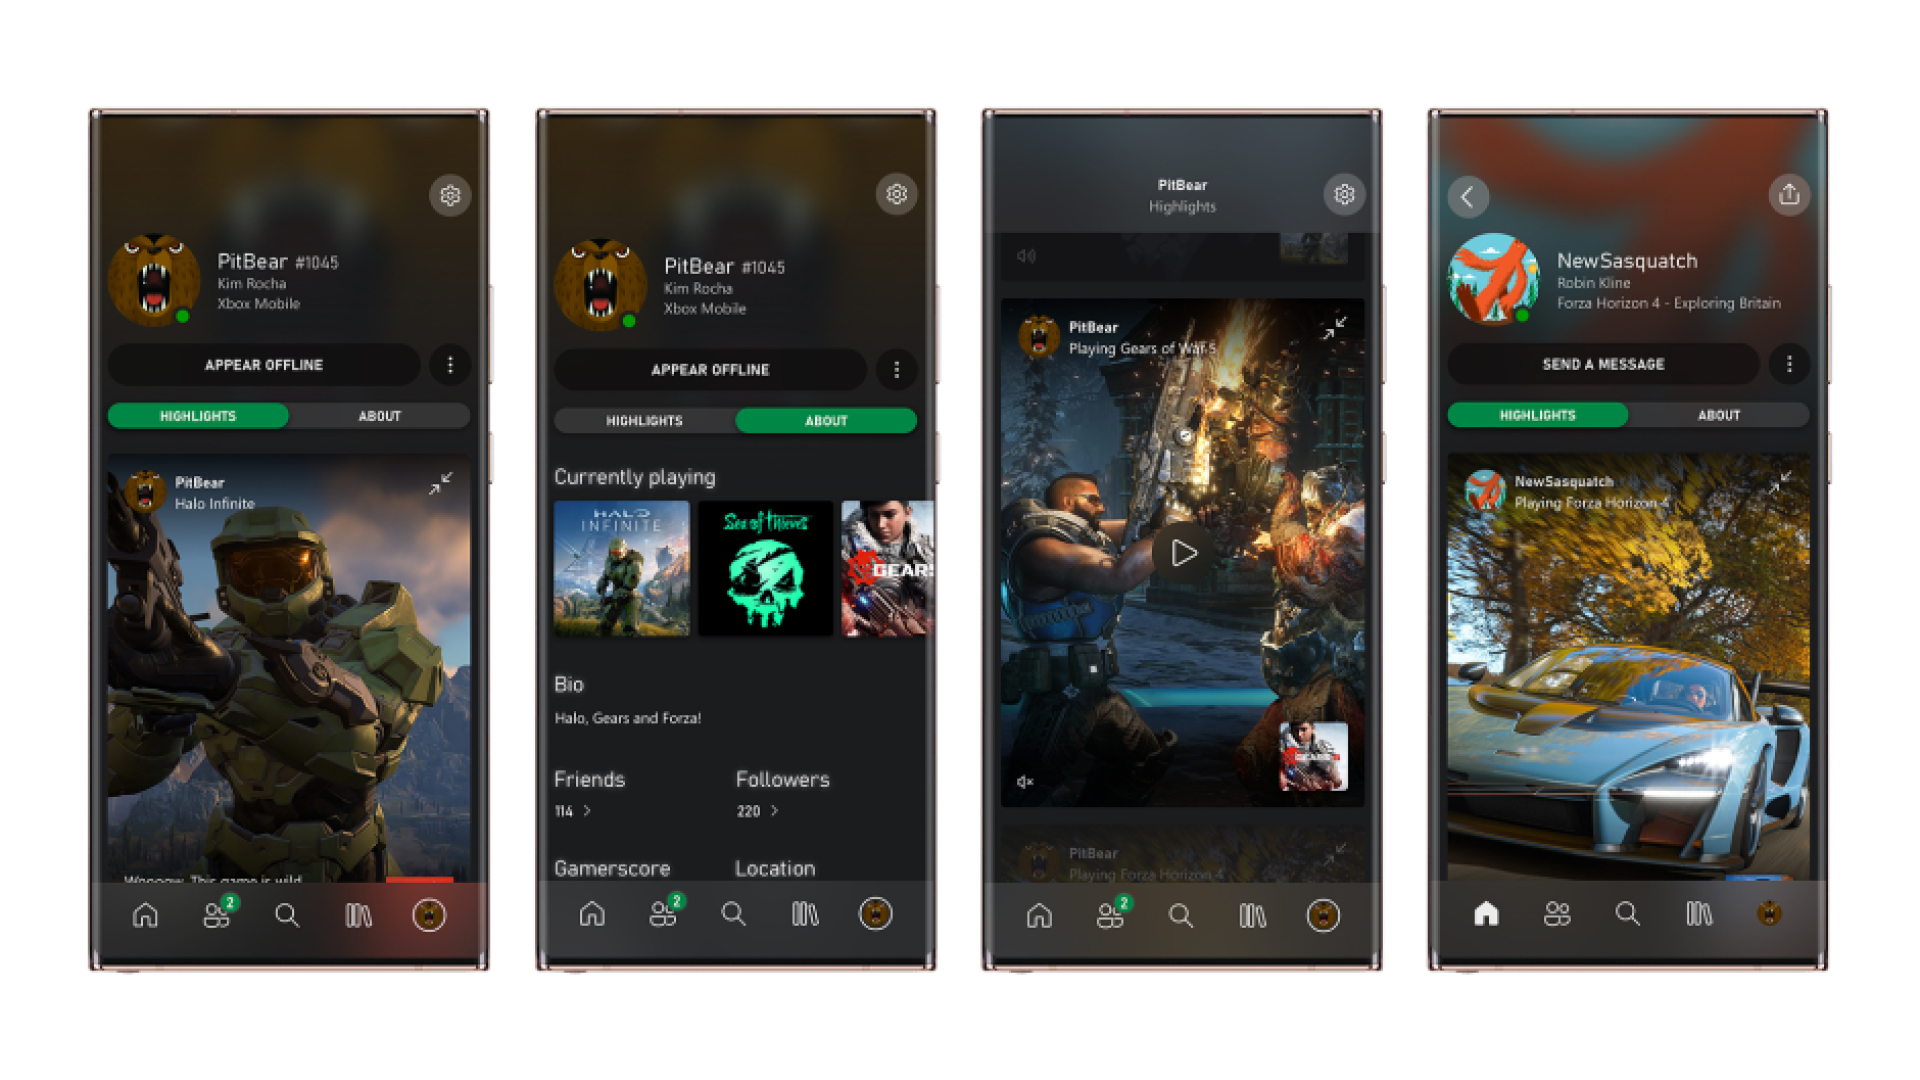 New Xbox App (Beta) on Mobile now available on Android Xbox-Mobile-App_Profiles.jpg